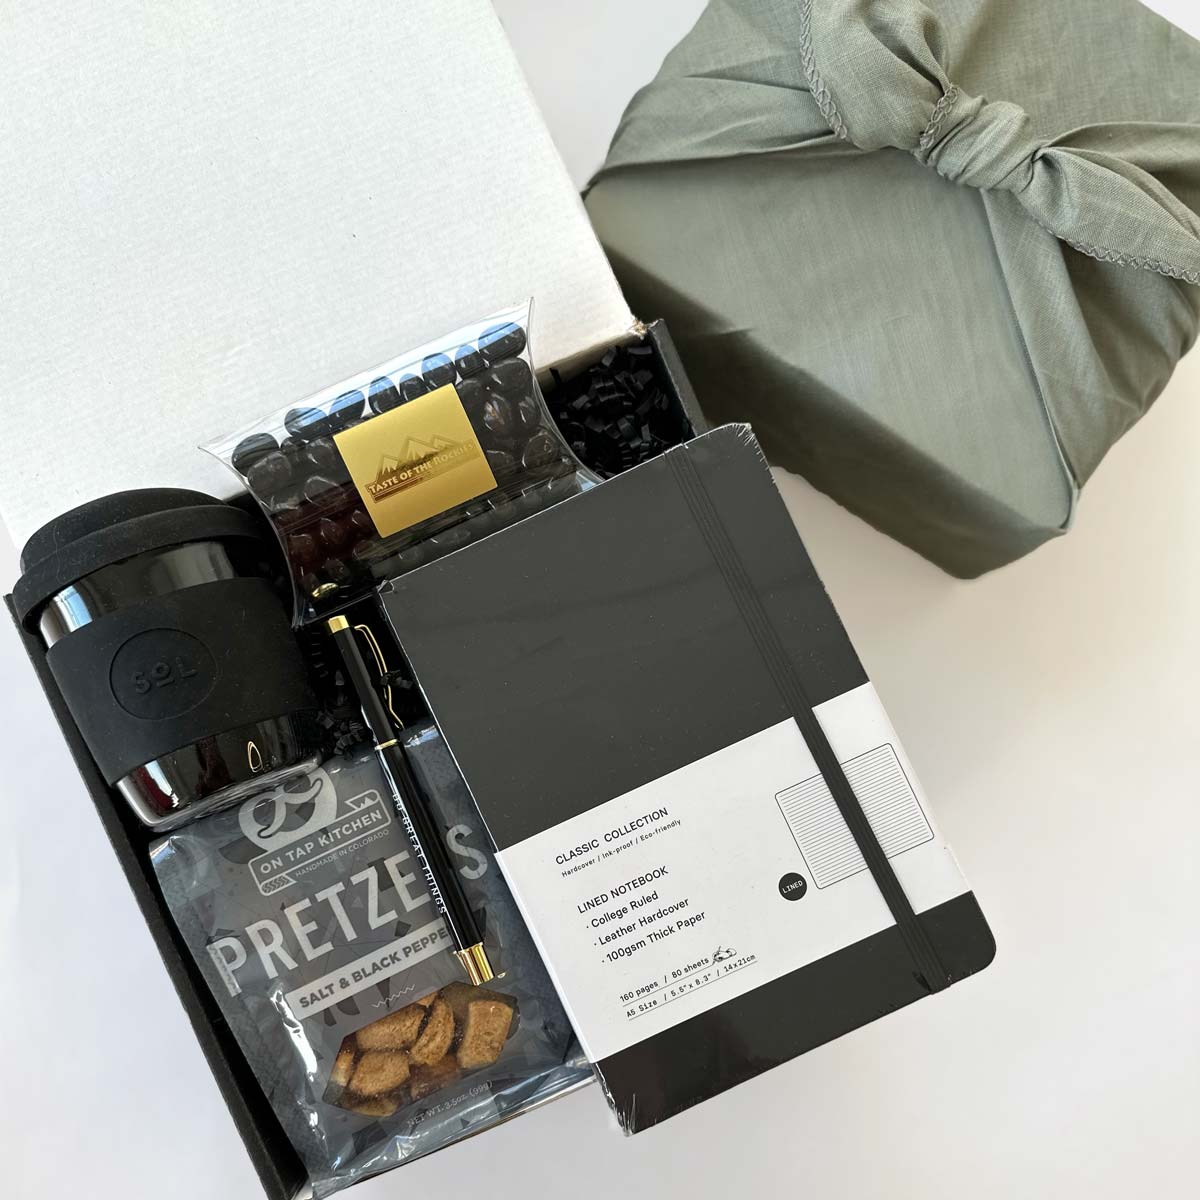 kadoo do great things gift box with black sol cup, pretzel, black notebook, pen, espresso beans candy and more. wrapped in gray fabric furoshiki wrap.